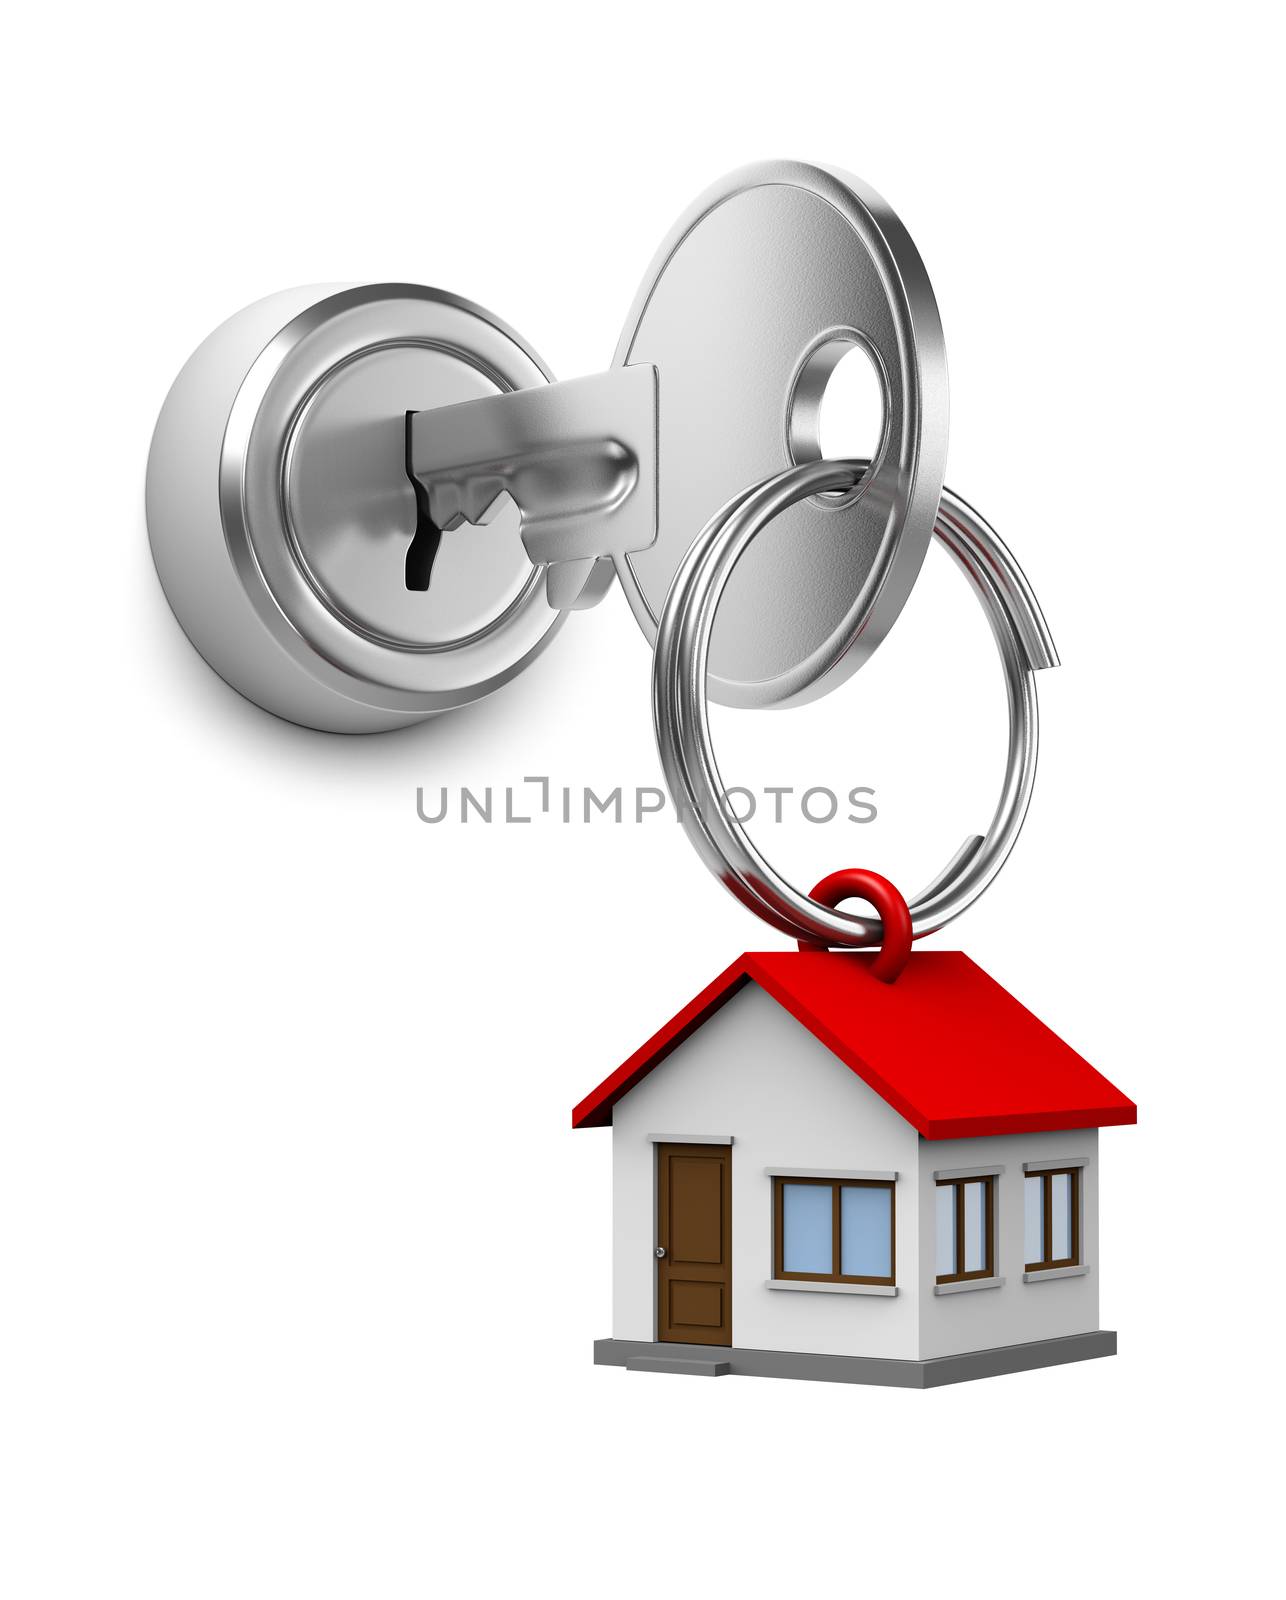 One Single Metal Key with Key Rings in the Shape of a House Inserted in a Door Lock on White Background 3D Illustration